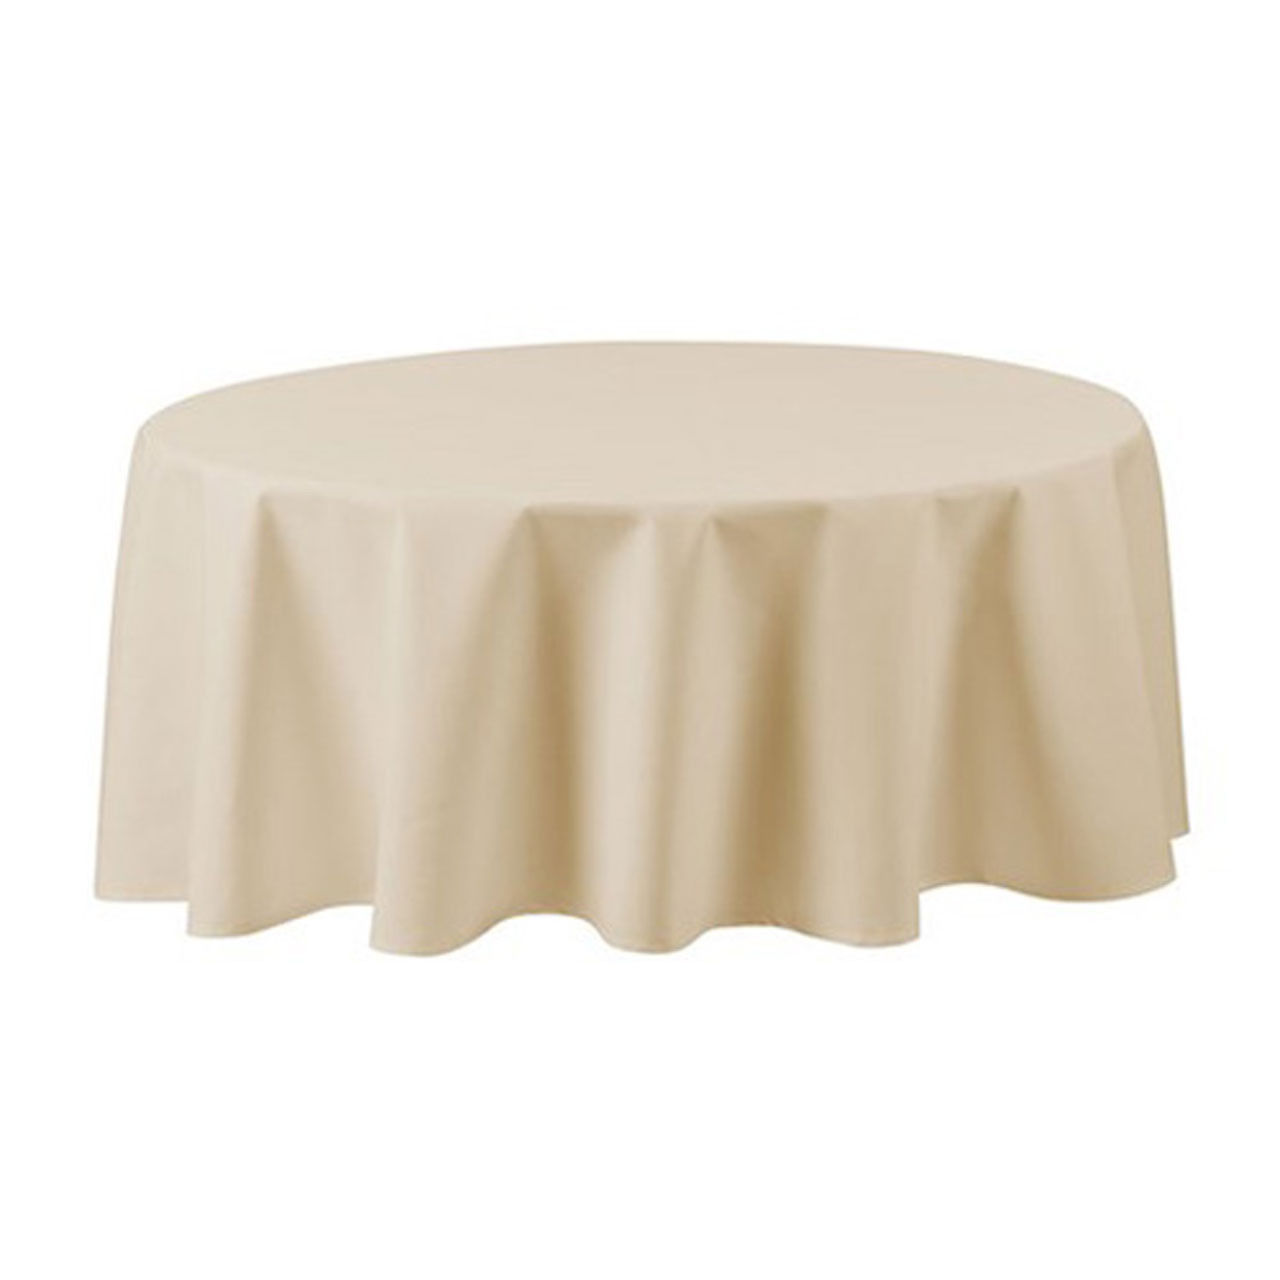 Are these ivory tablecloths bulk suitable for a restaurant setting?